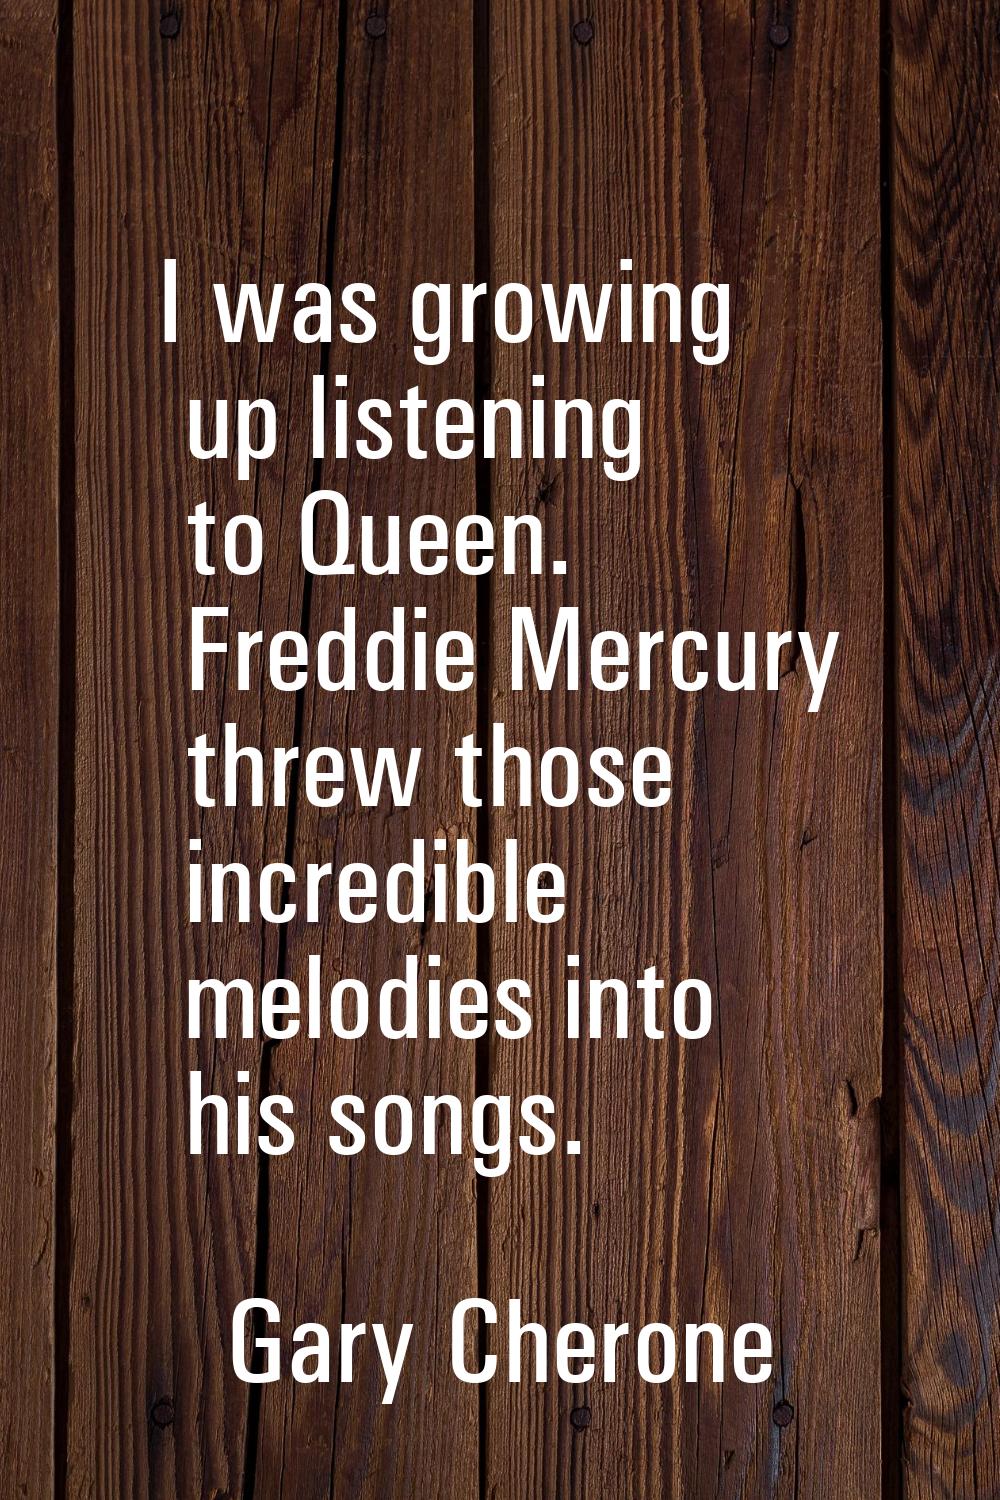 I was growing up listening to Queen. Freddie Mercury threw those incredible melodies into his songs